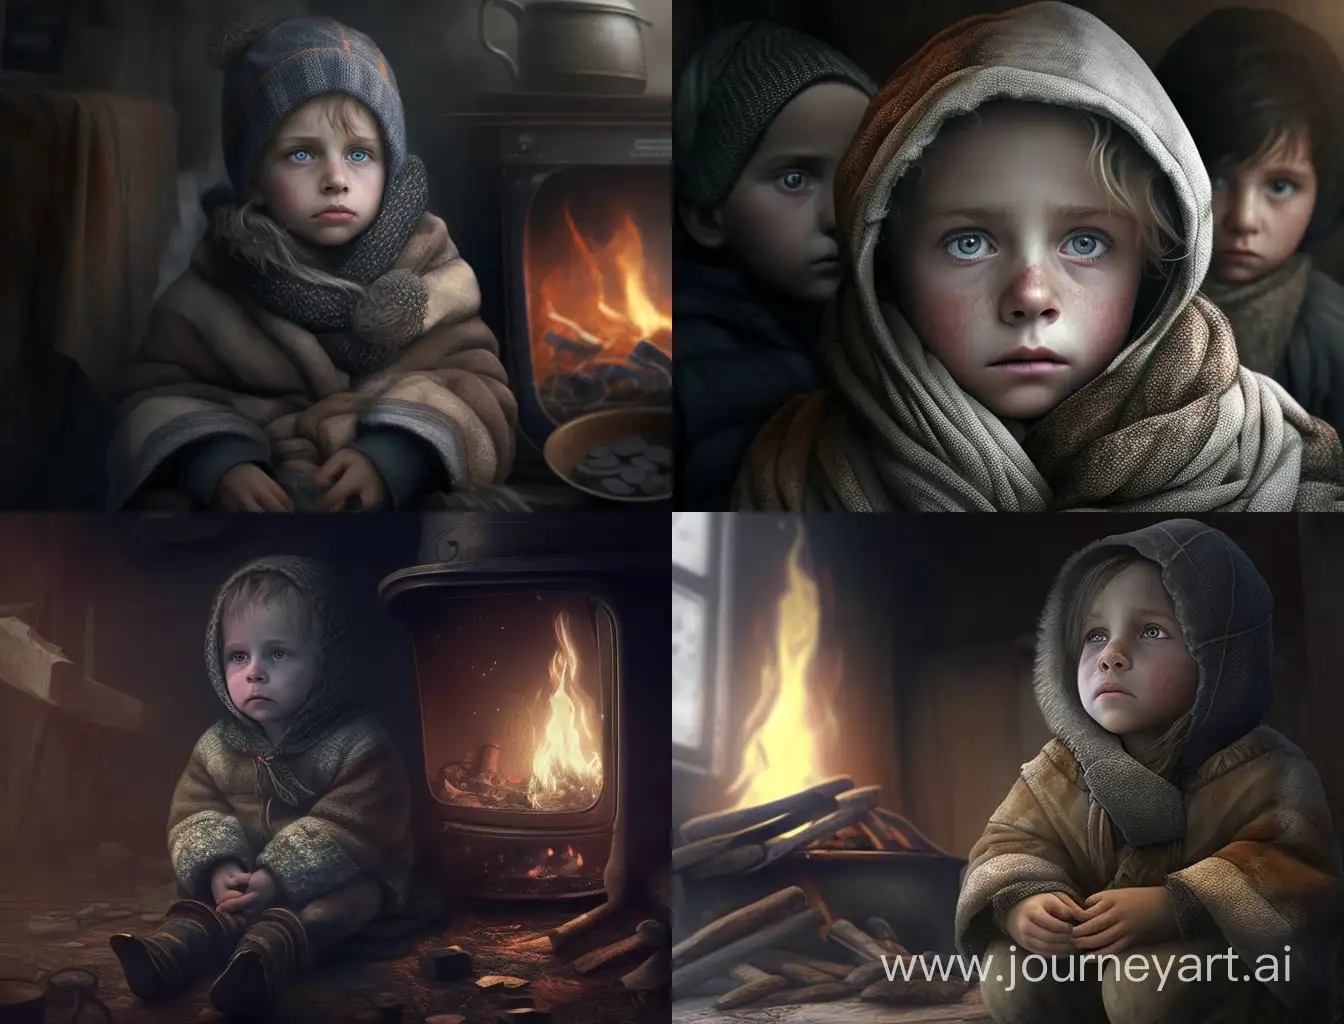 Lonely-Child-Yearning-for-Family-Warmth